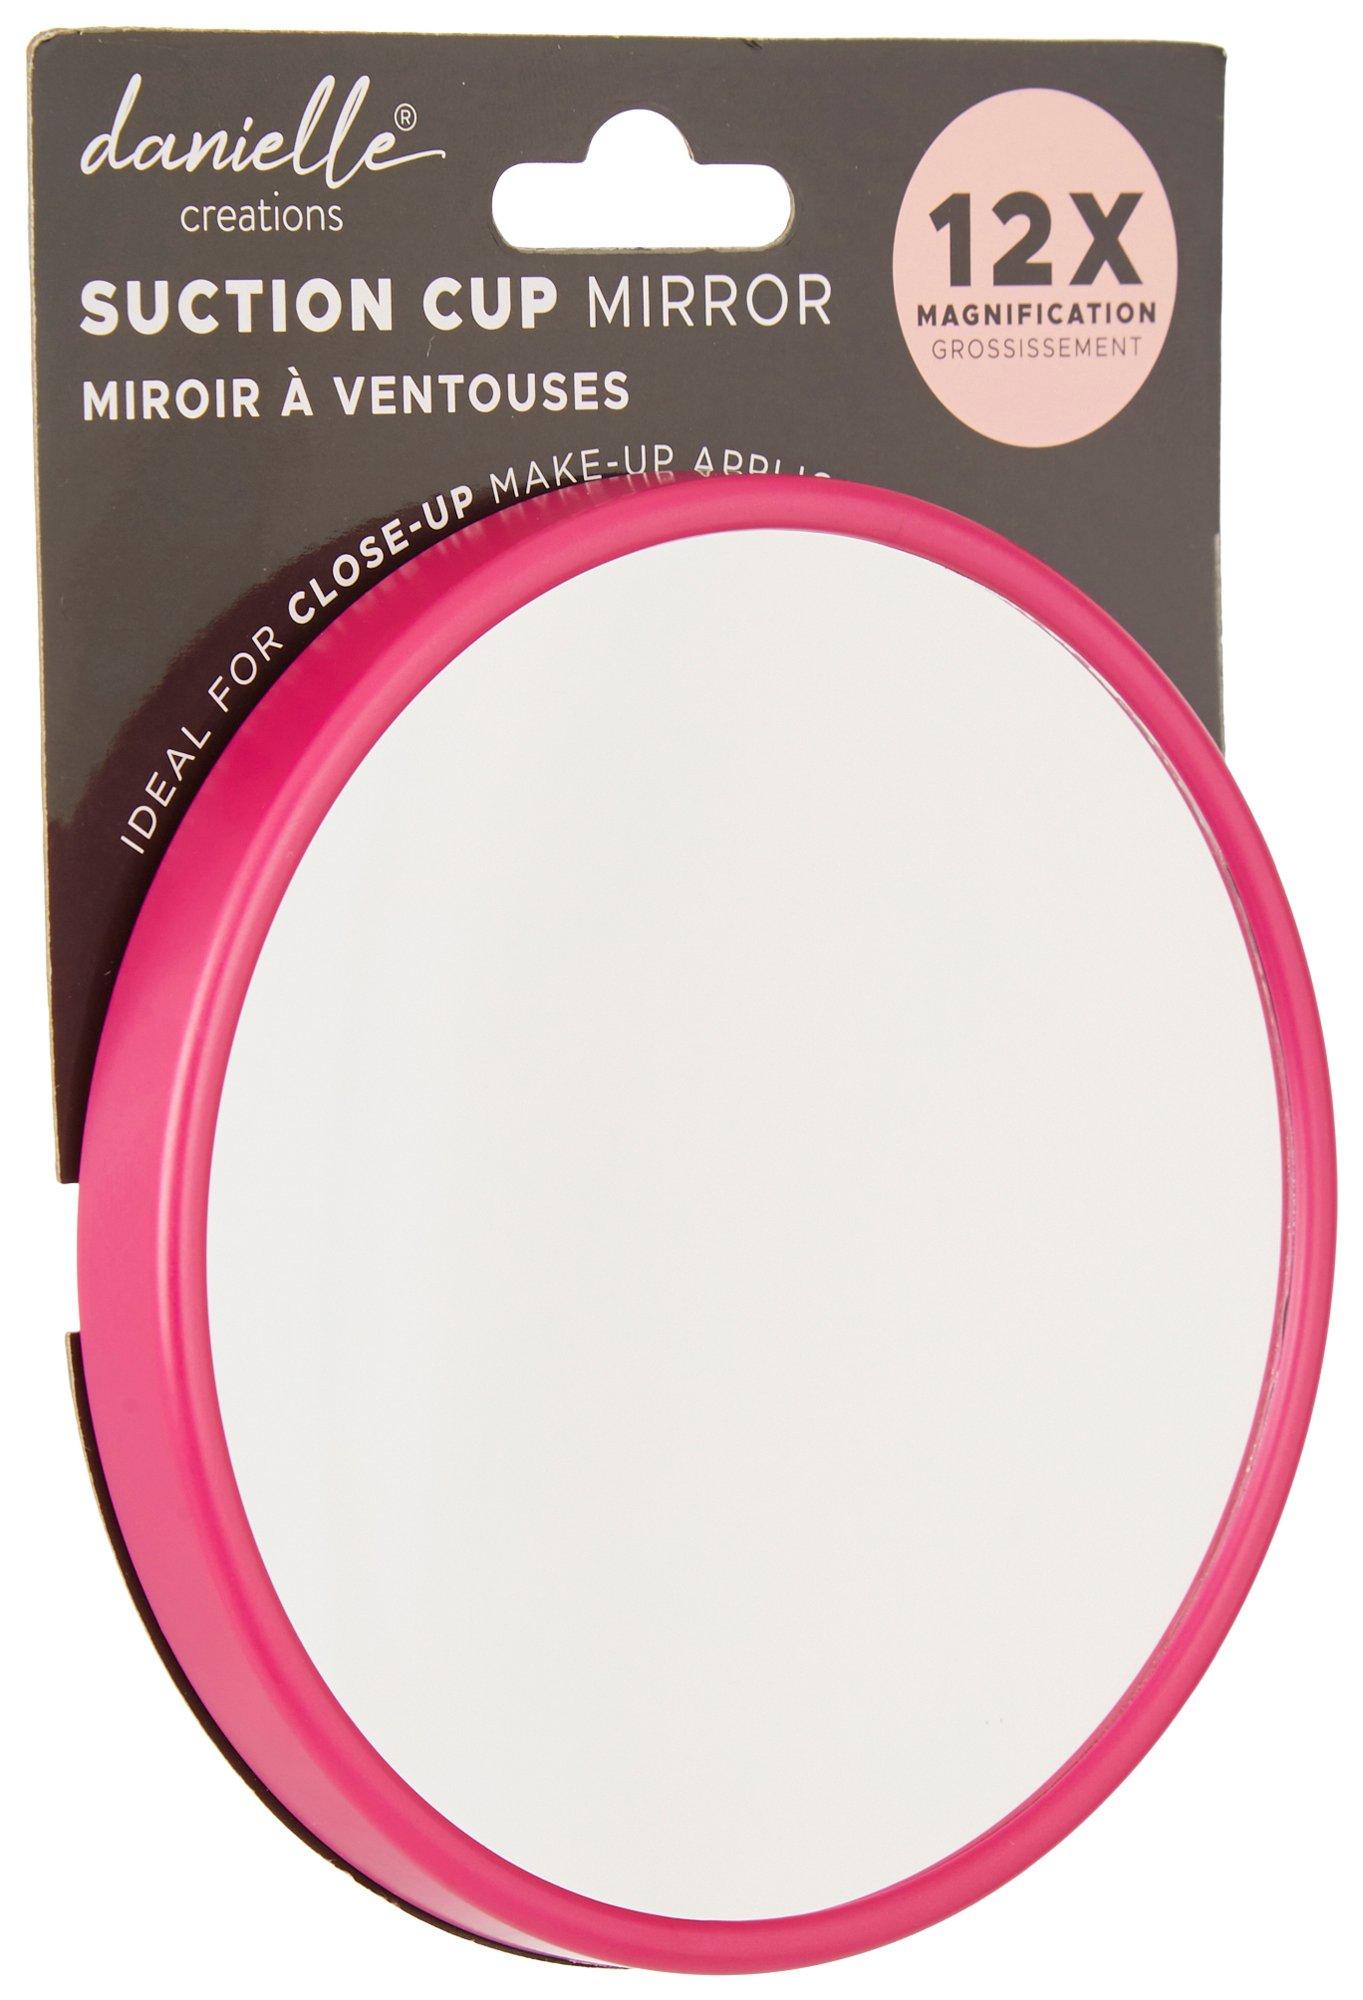 Suction Cup 12x Magnification Mirror